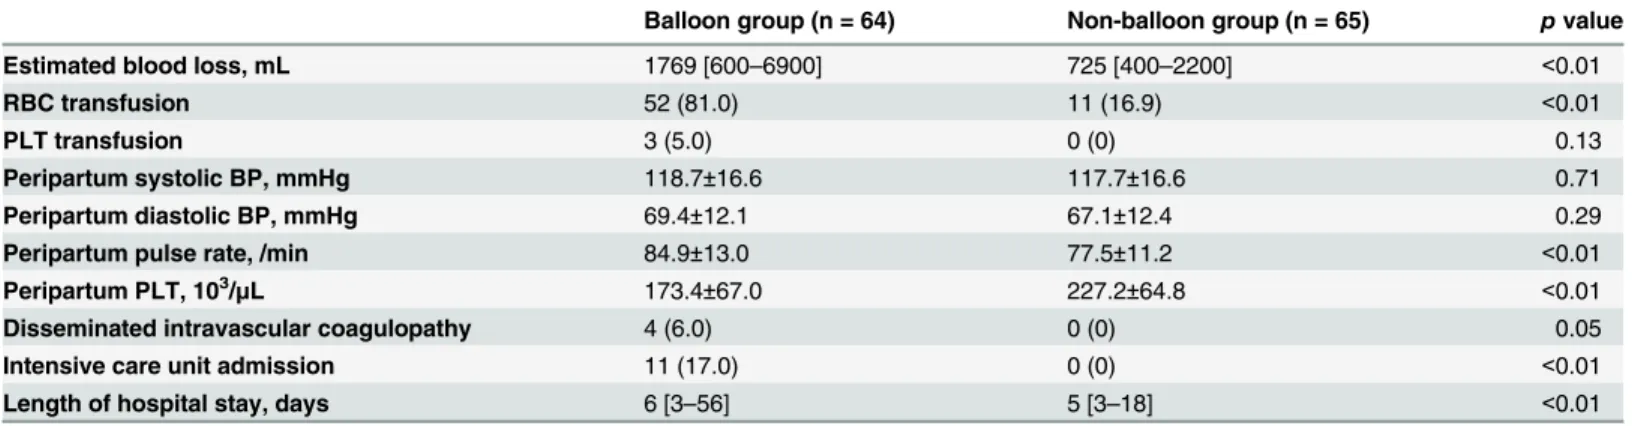 Table 2. Comparison of Measures of Severity and Outcomes between Uterine Balloon Tamponade and Non-balloon Tamponade Groups.